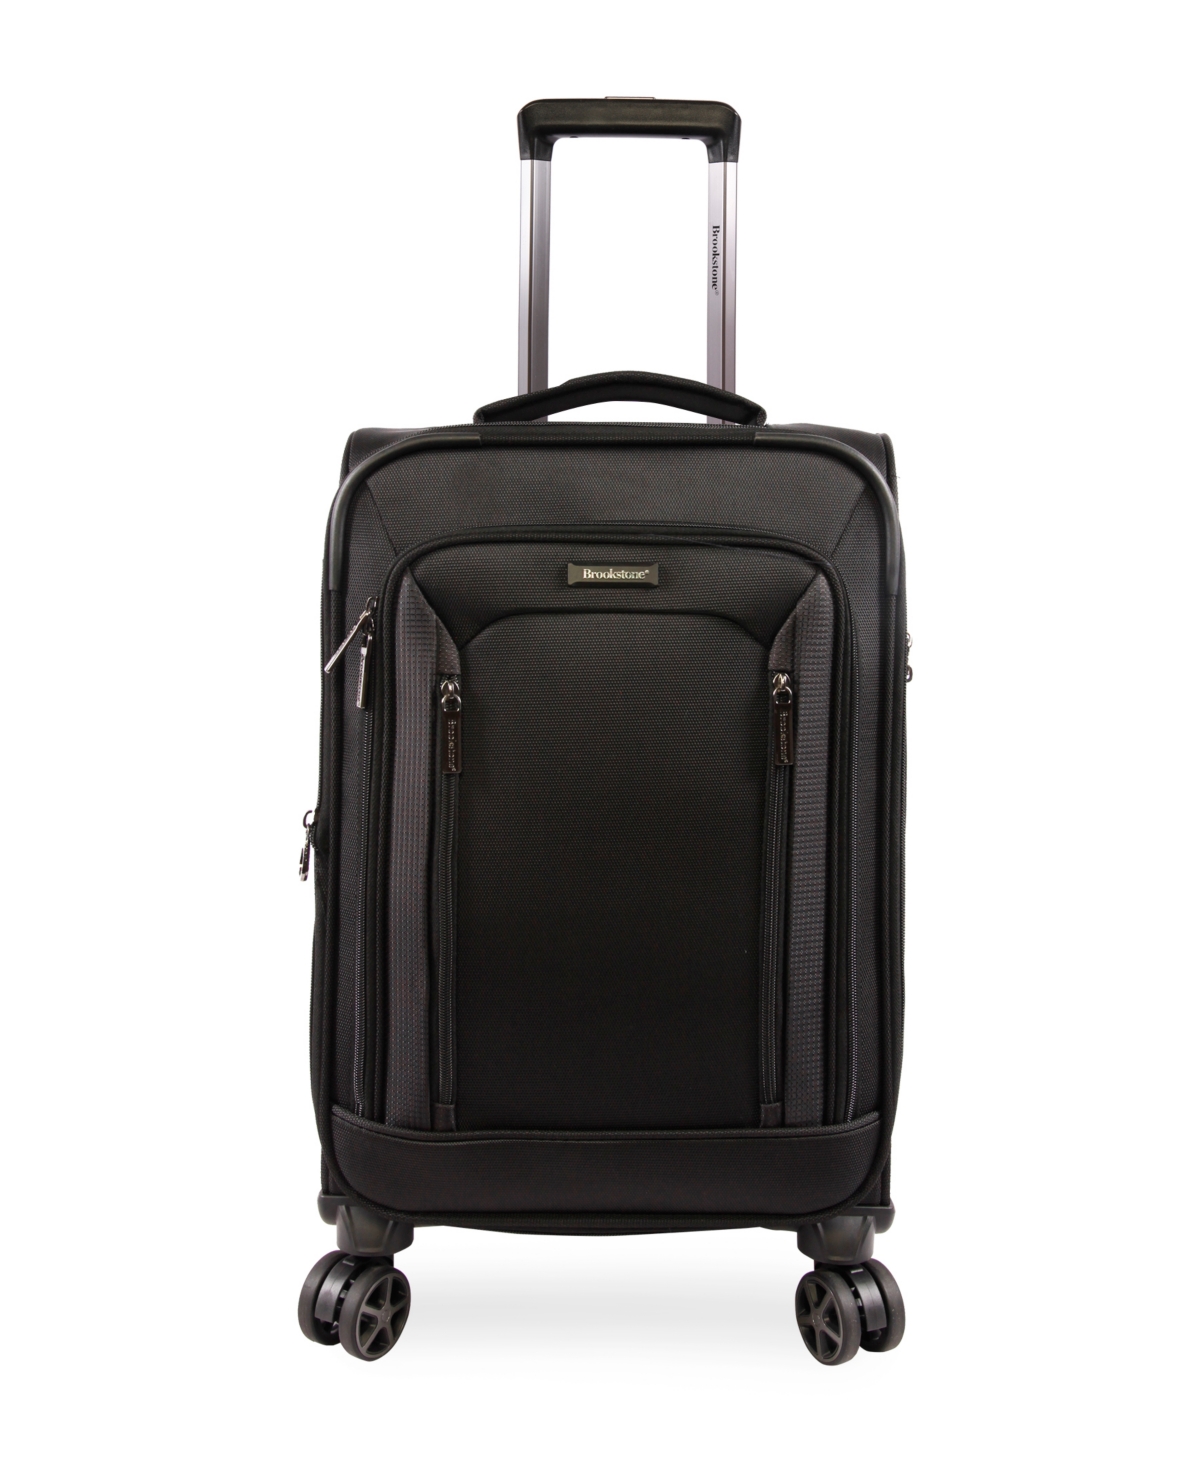 Elswood 21" Softside Carry-On Luggage with Charging Port - Charcoal